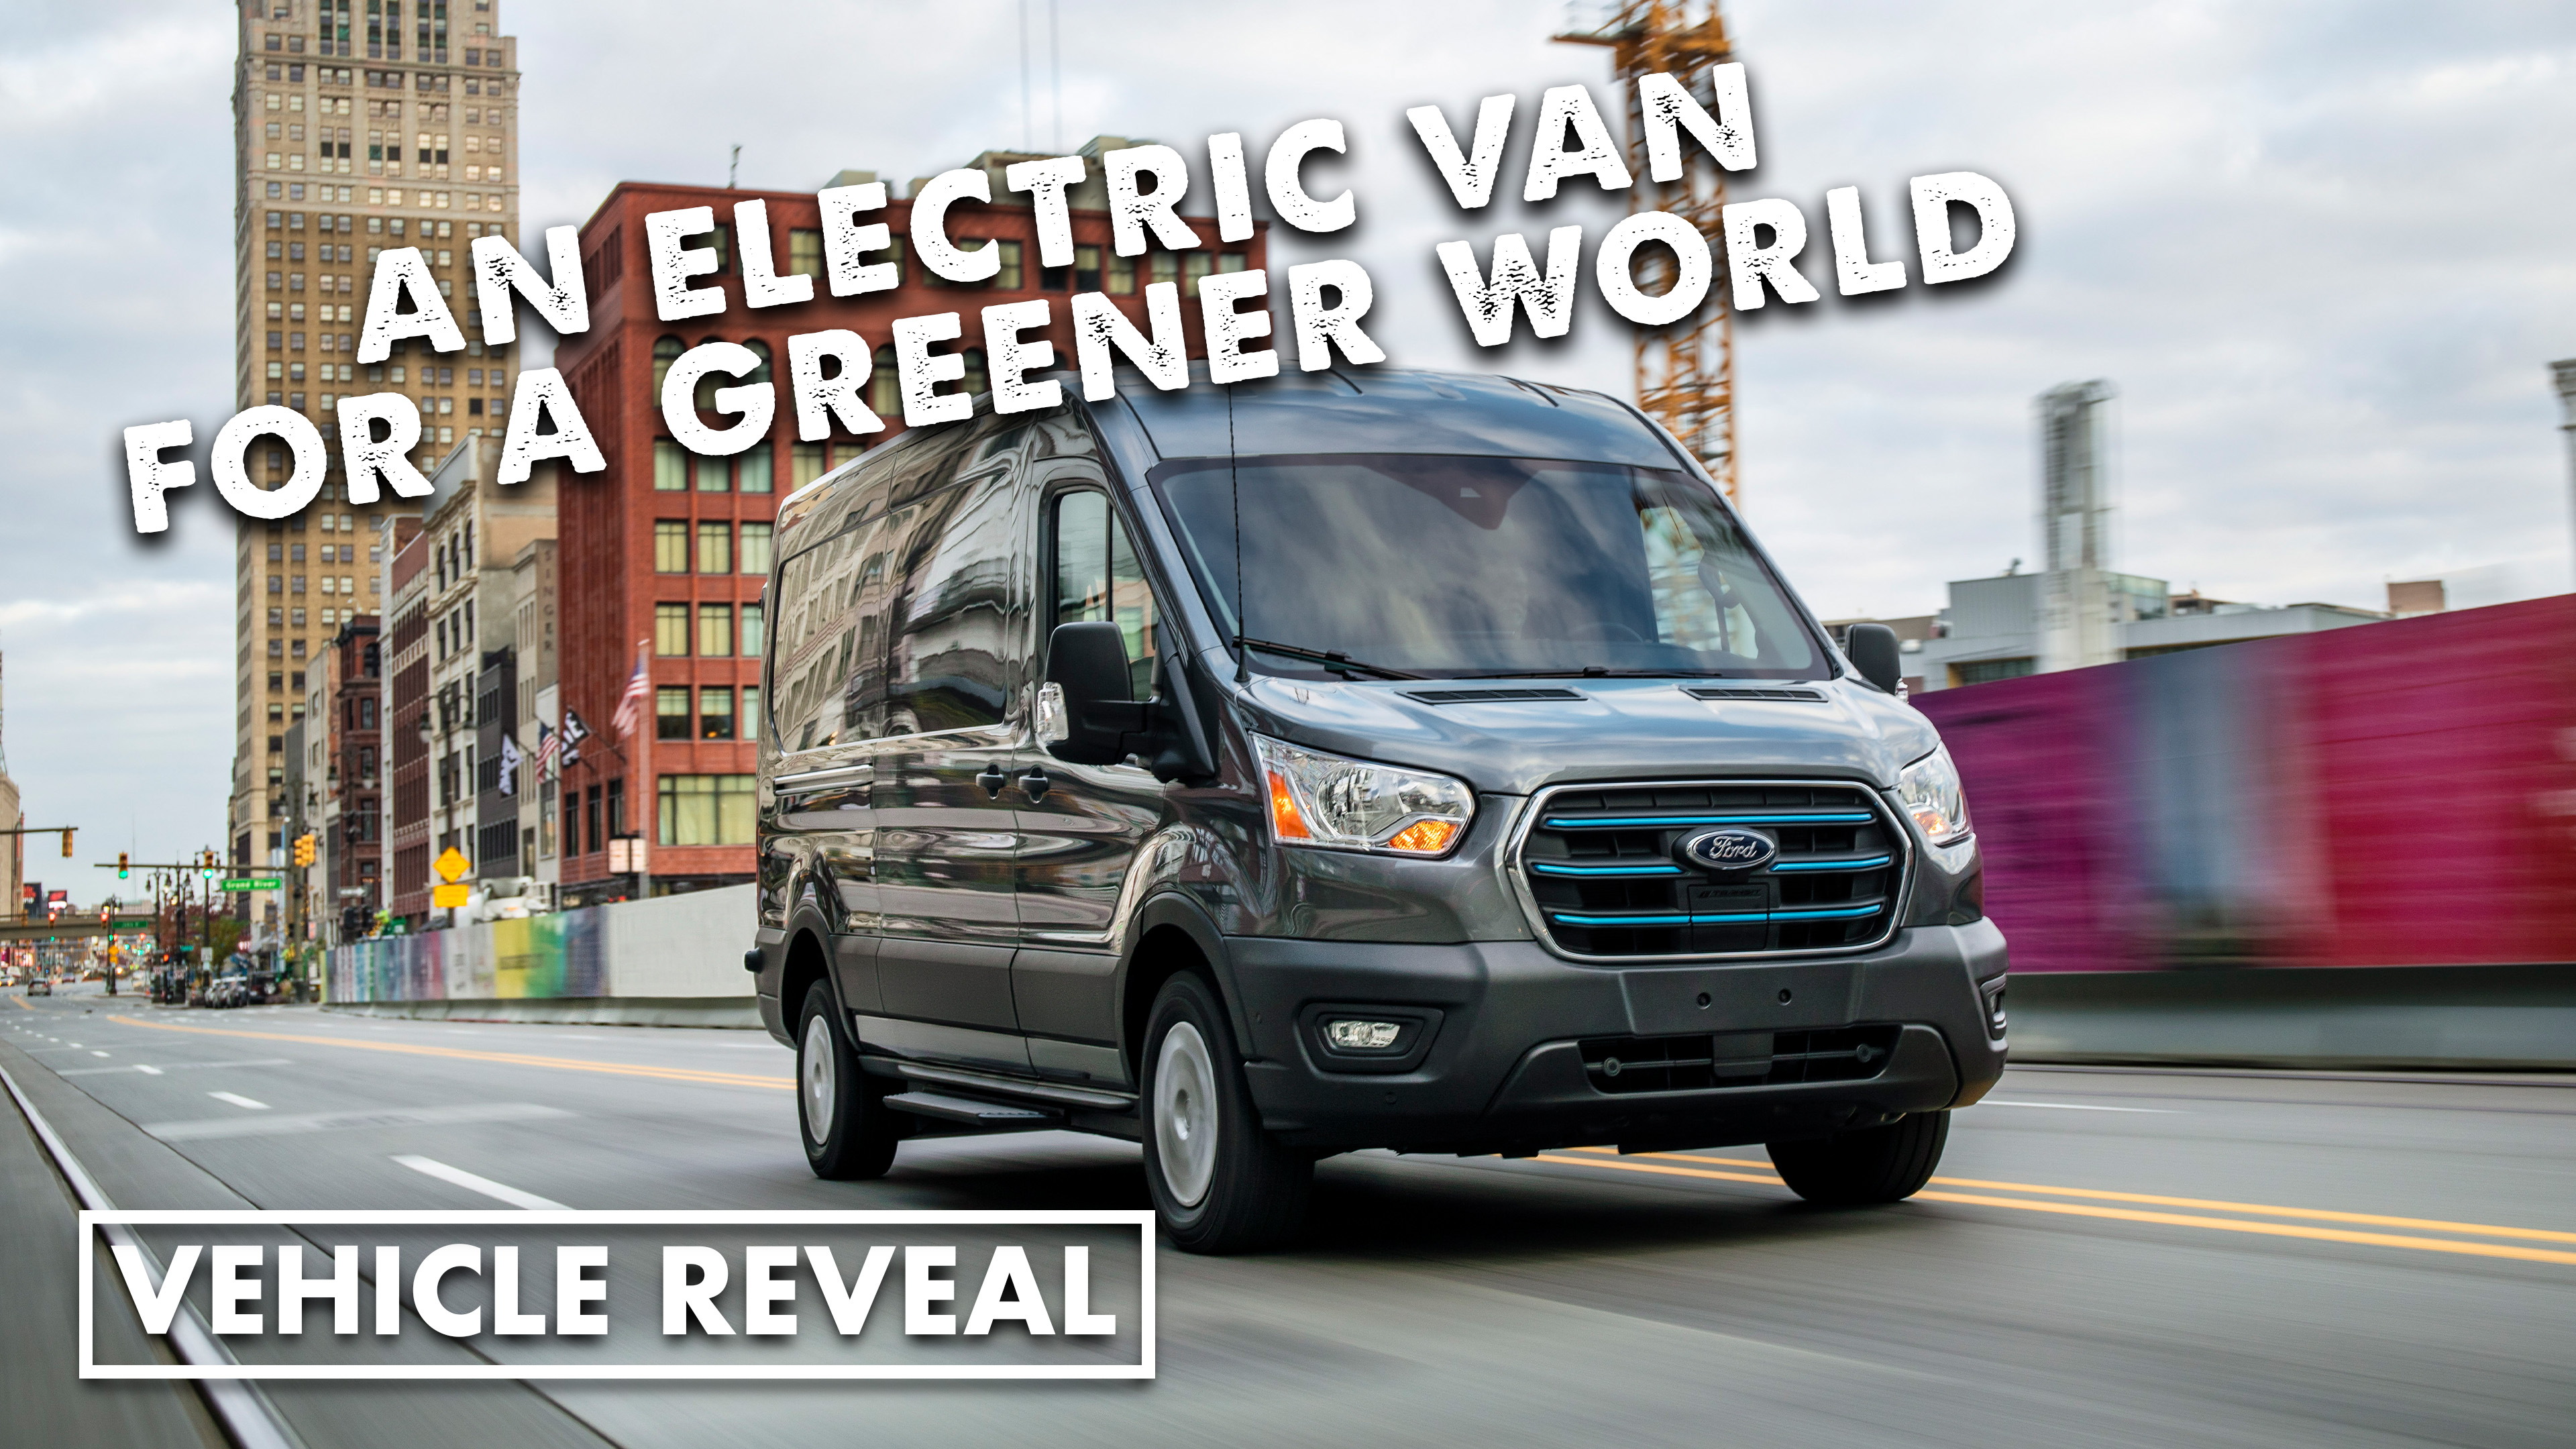 The 2022 Ford E-Transit is an all-electric van for a ...